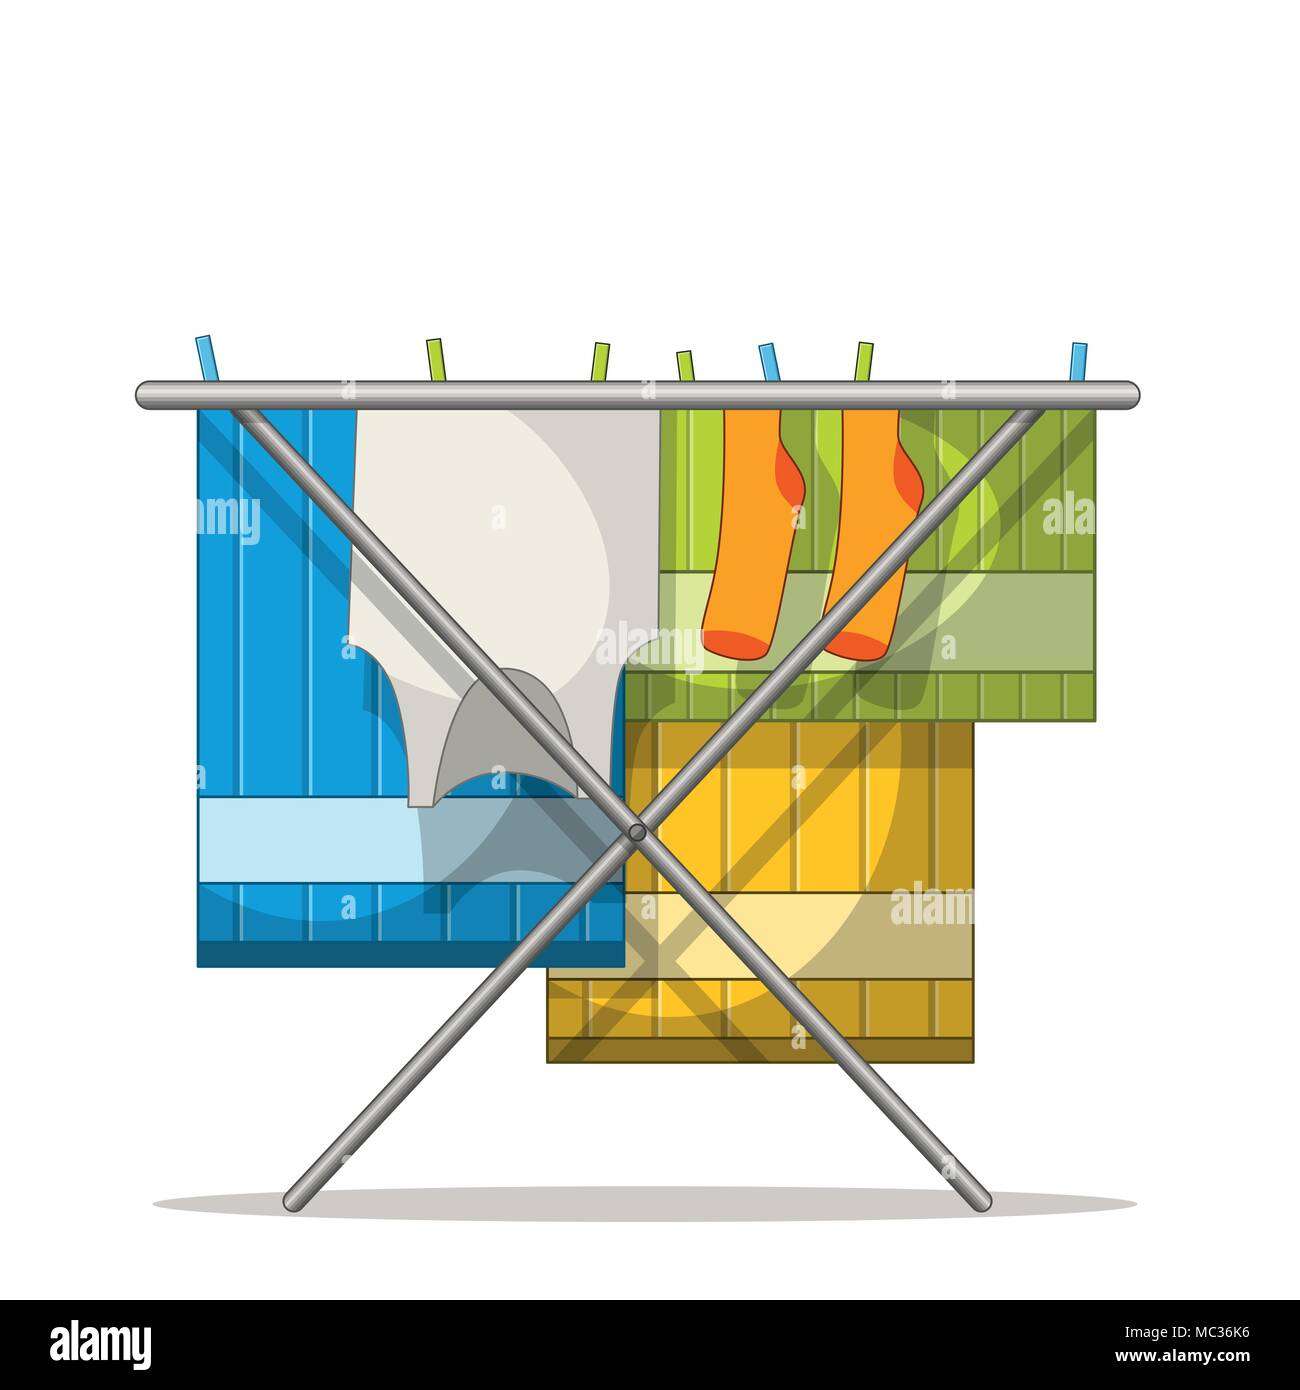 Clothes rack with laundry. Isolated on white background. Stock Vector